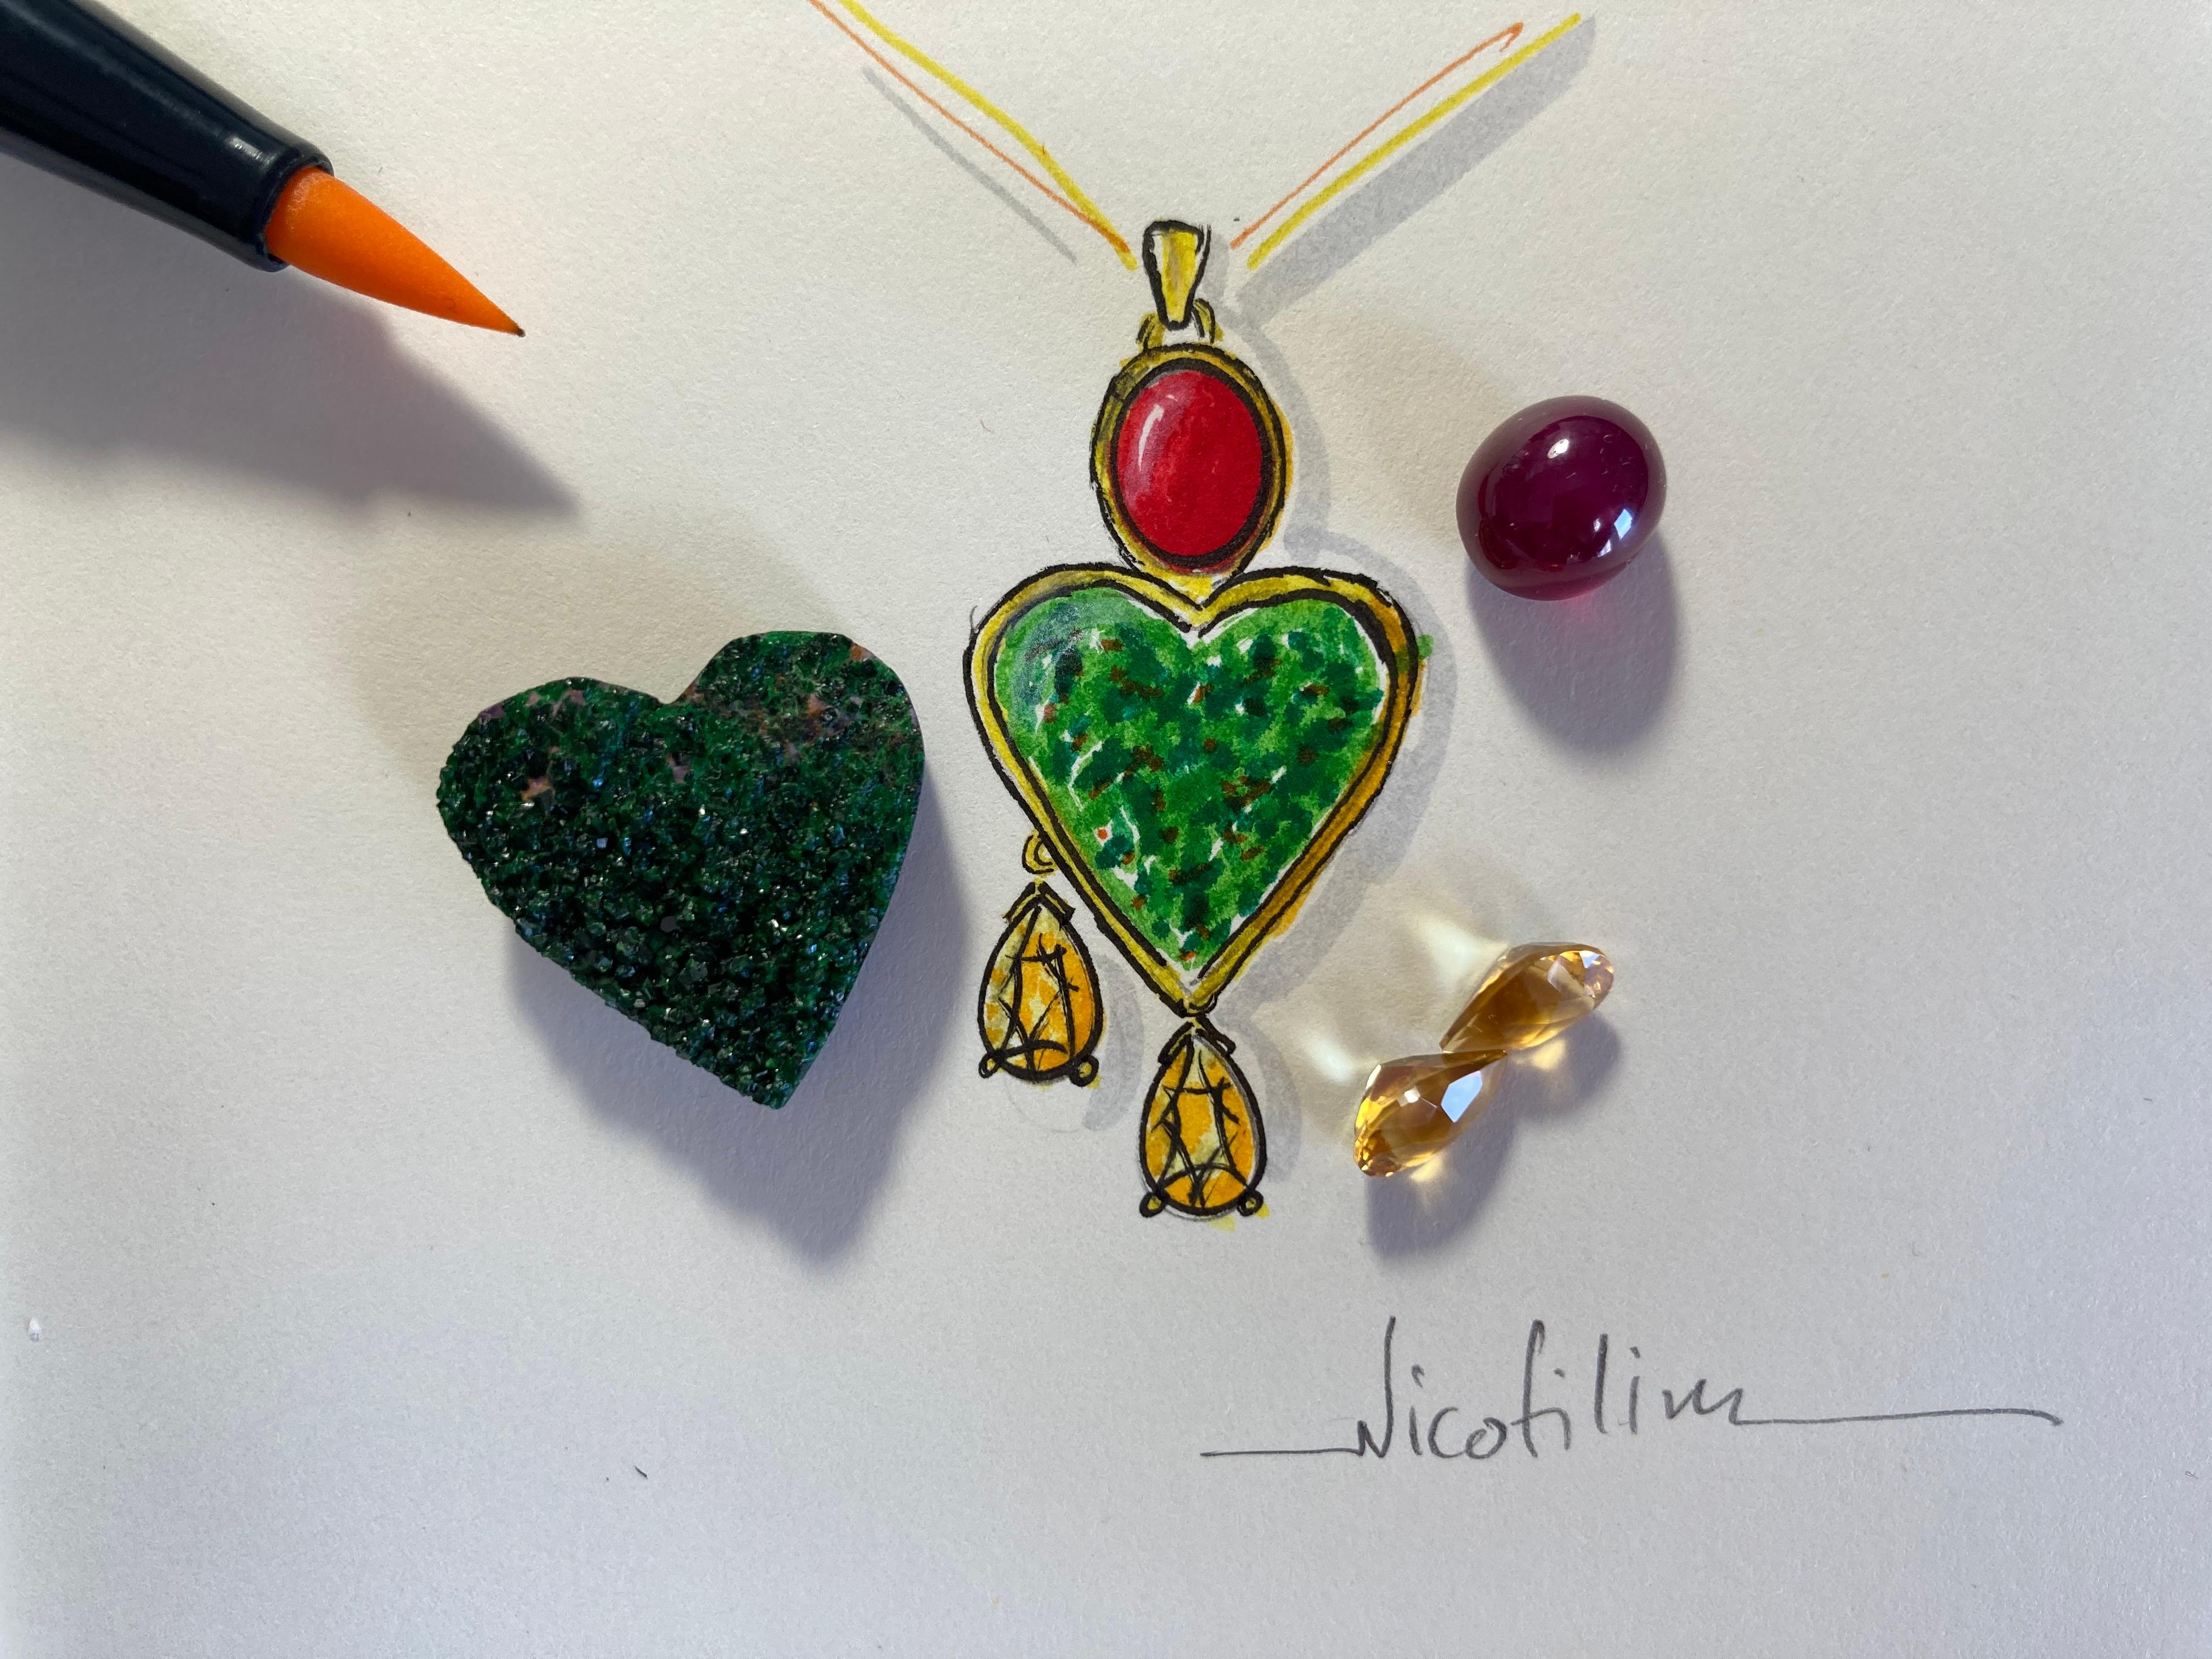 Green Heart - Nicofilimon 2021
in this One-Of-a-kind creation by Nicofilimon you have the privilege to choose one of the four variations of the design and it will by handcrafted especially for you.
This Art work will be made from 18 kt yellow gold,